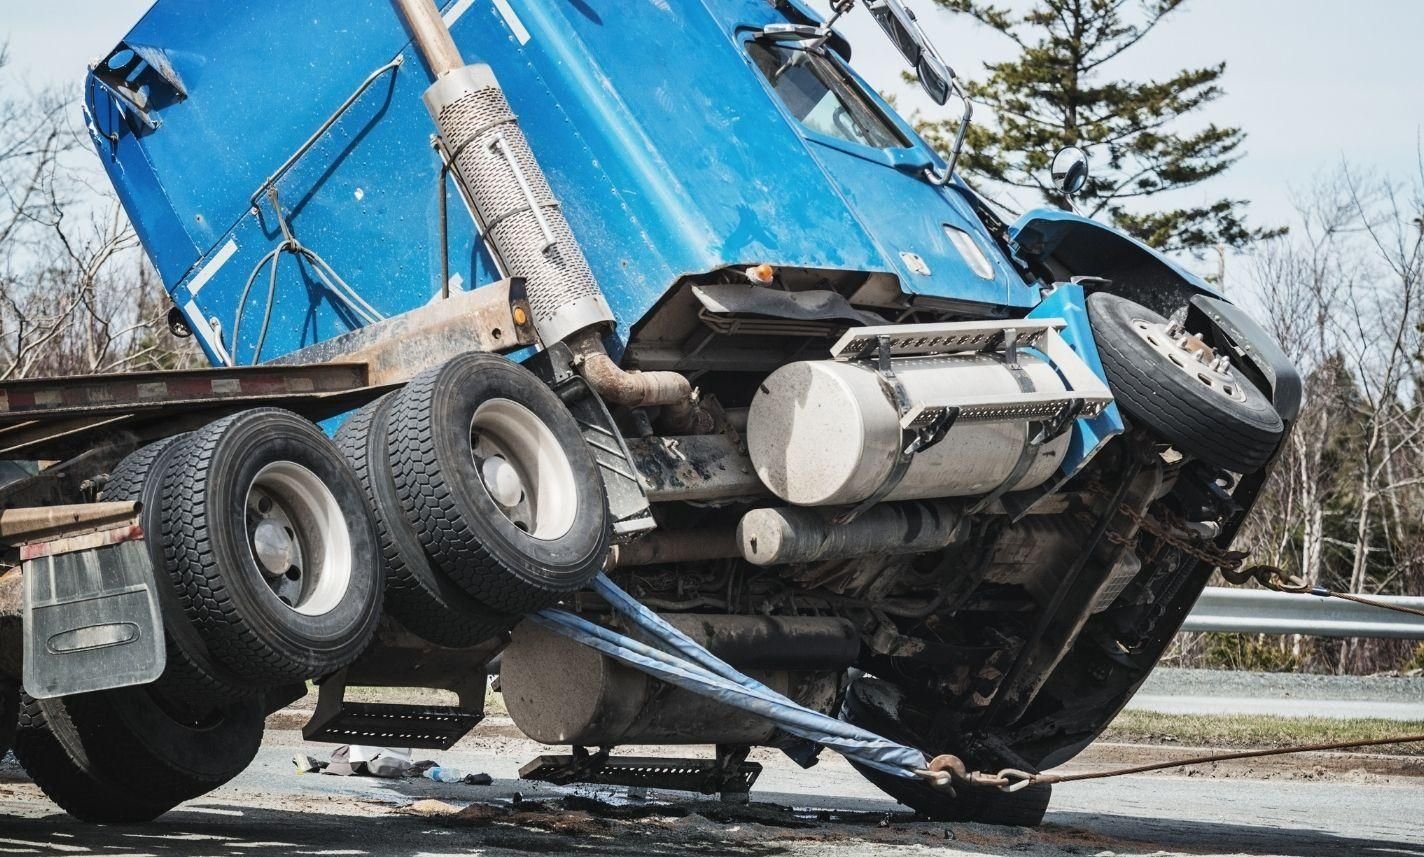 edison-commercial-truck-accident-injury-lawyer